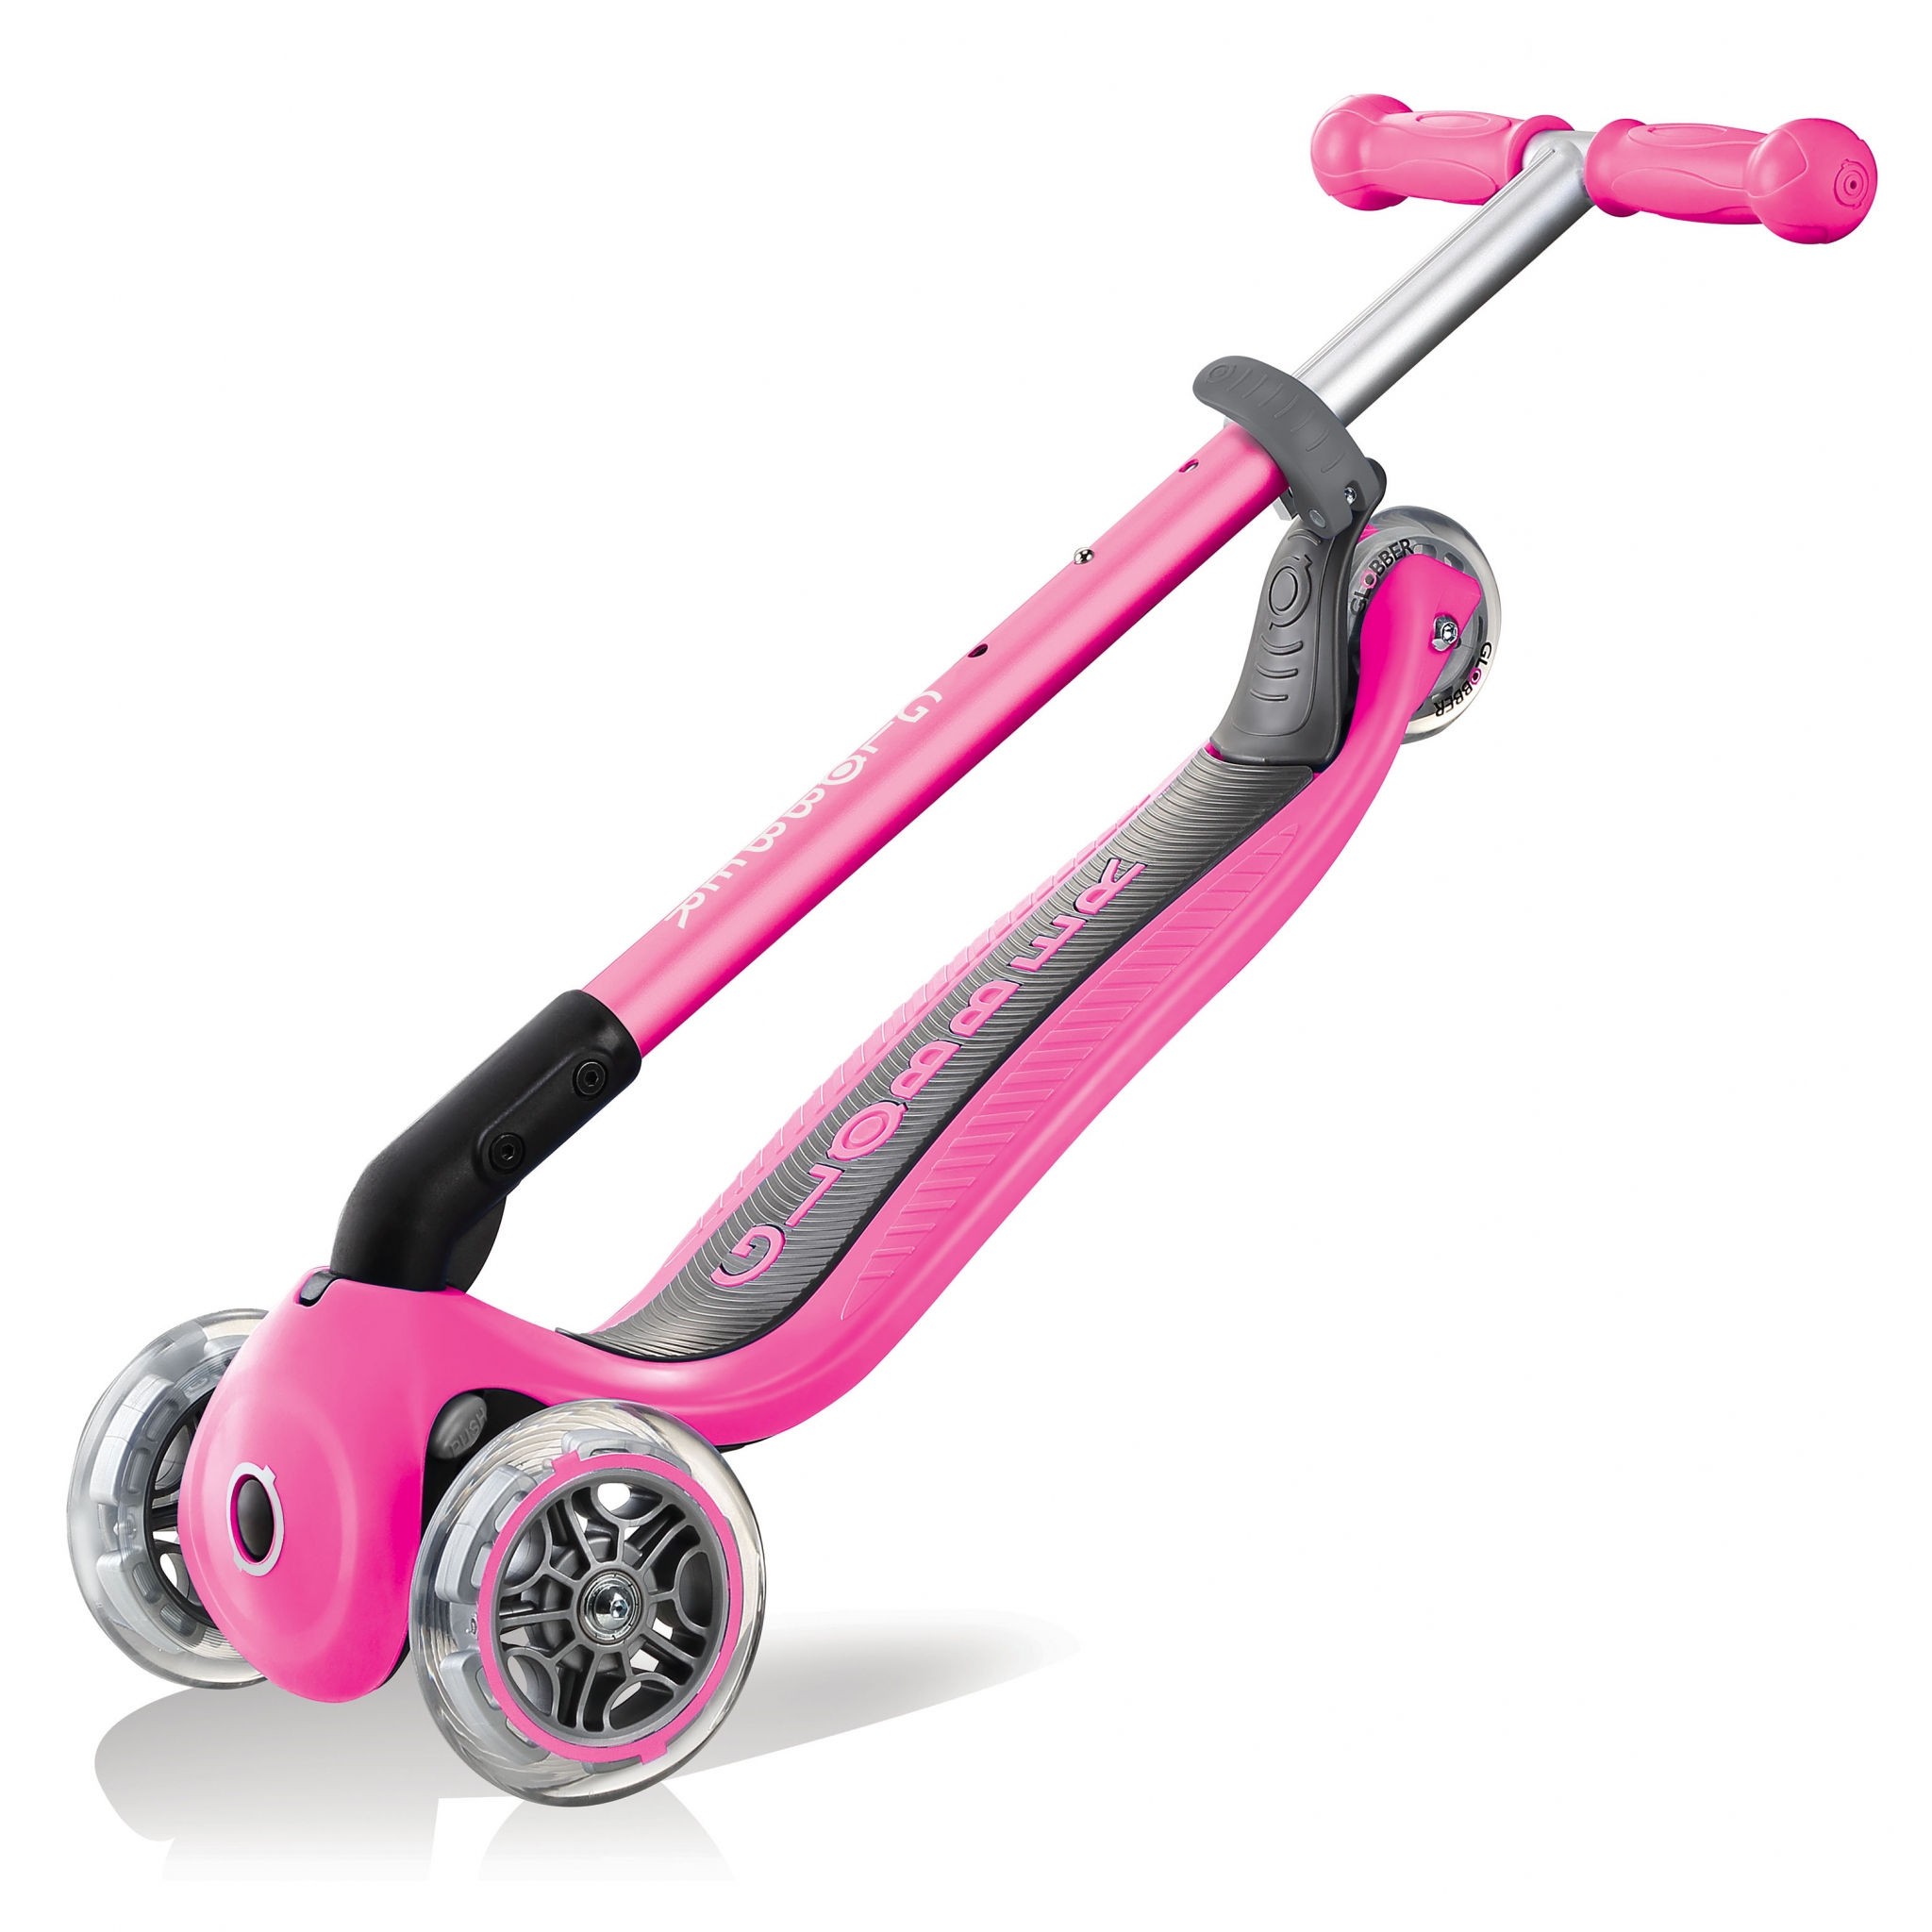 PRIMO-FOLDABLE-3-wheel-foldable-scooter-for-kids-trolley-mode-neon-pink 4